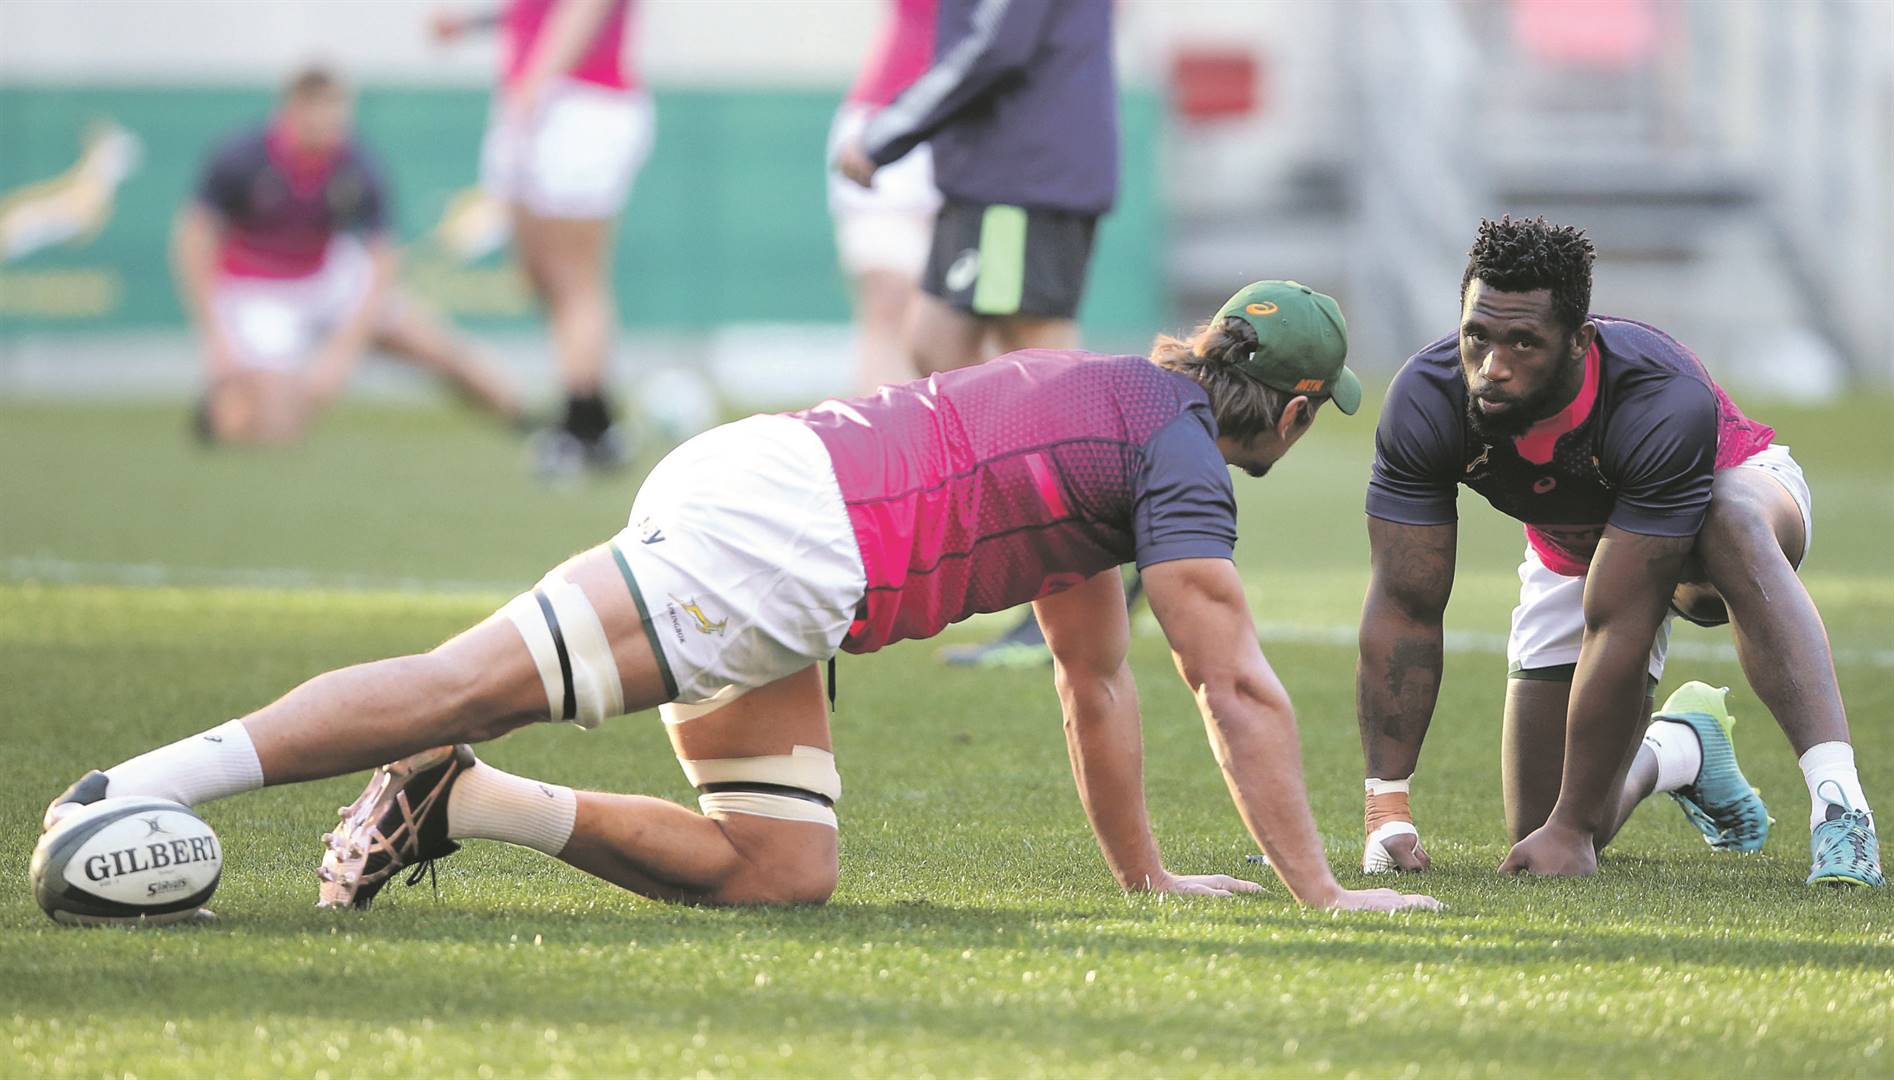 The long-standing friendship between Siya Kolisi and his national team-mate Eben Etzebeth could lead to the reunion of the two at the Sharks this year. Photo: Richard Huggard / Gallo Images